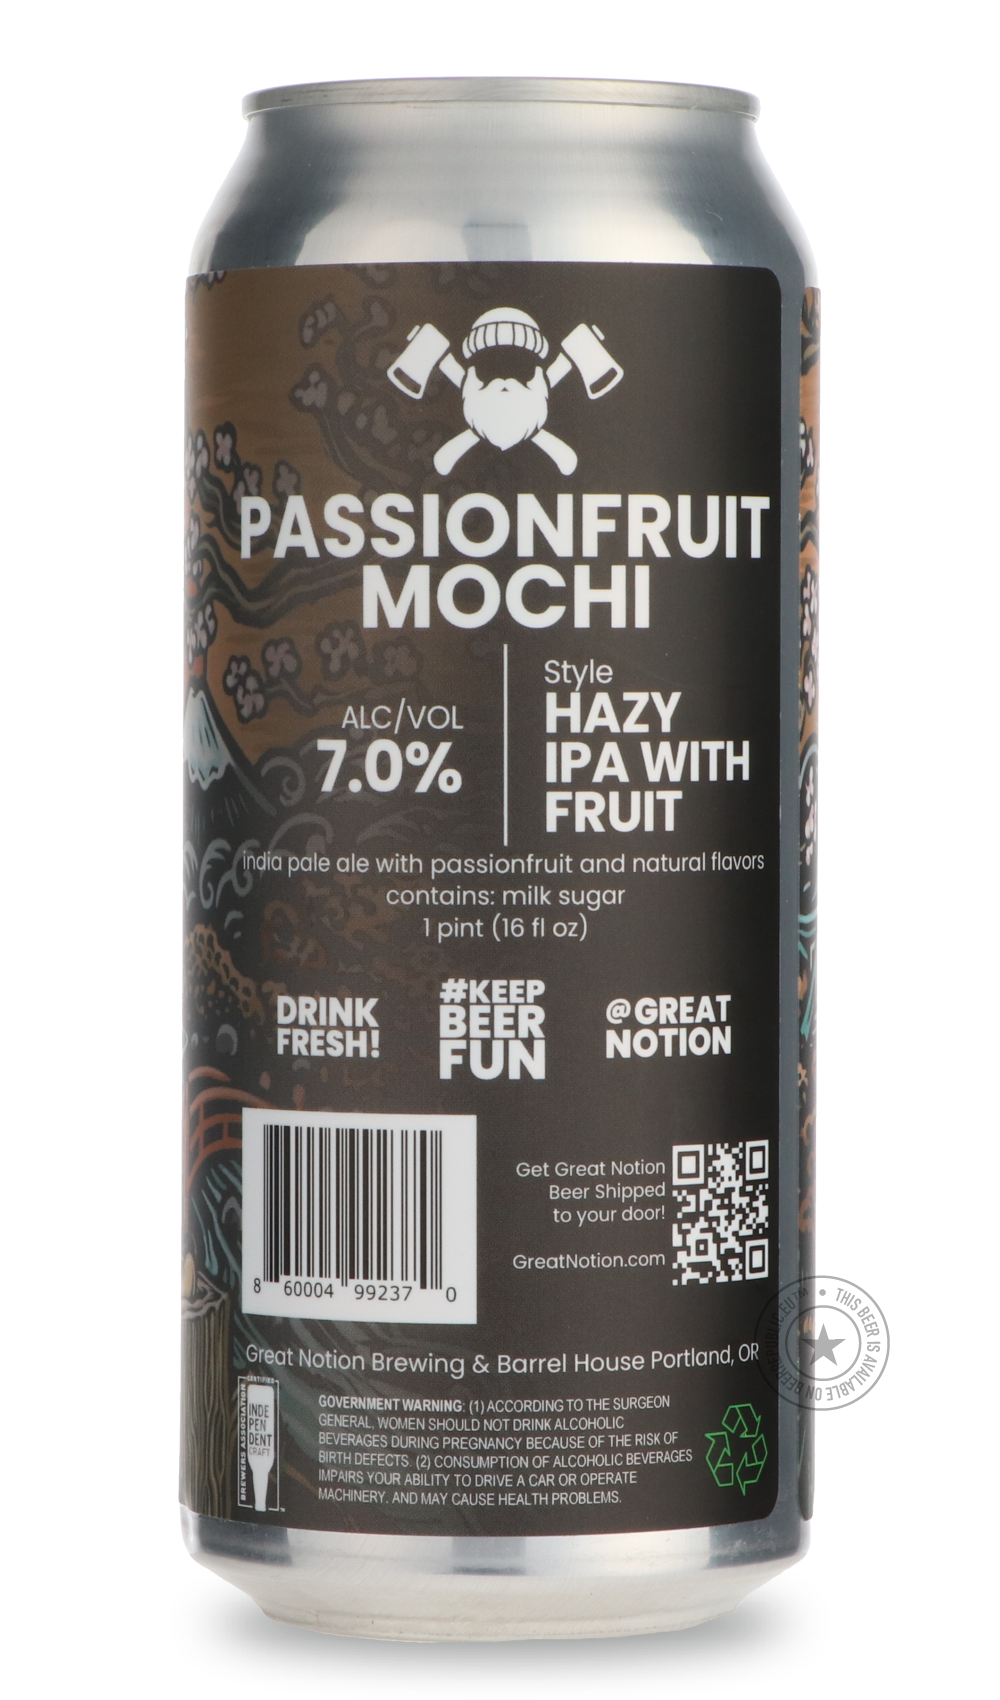 -Great Notion- Passionfruit Mochi-IPA- Only @ Beer Republic - The best online beer store for American & Canadian craft beer - Buy beer online from the USA and Canada - Bier online kopen - Amerikaans bier kopen - Craft beer store - Craft beer kopen - Amerikanisch bier kaufen - Bier online kaufen - Acheter biere online - IPA - Stout - Porter - New England IPA - Hazy IPA - Imperial Stout - Barrel Aged - Barrel Aged Imperial Stout - Brown - Dark beer - Blond - Blonde - Pilsner - Lager - Wheat - Weizen - Amber -